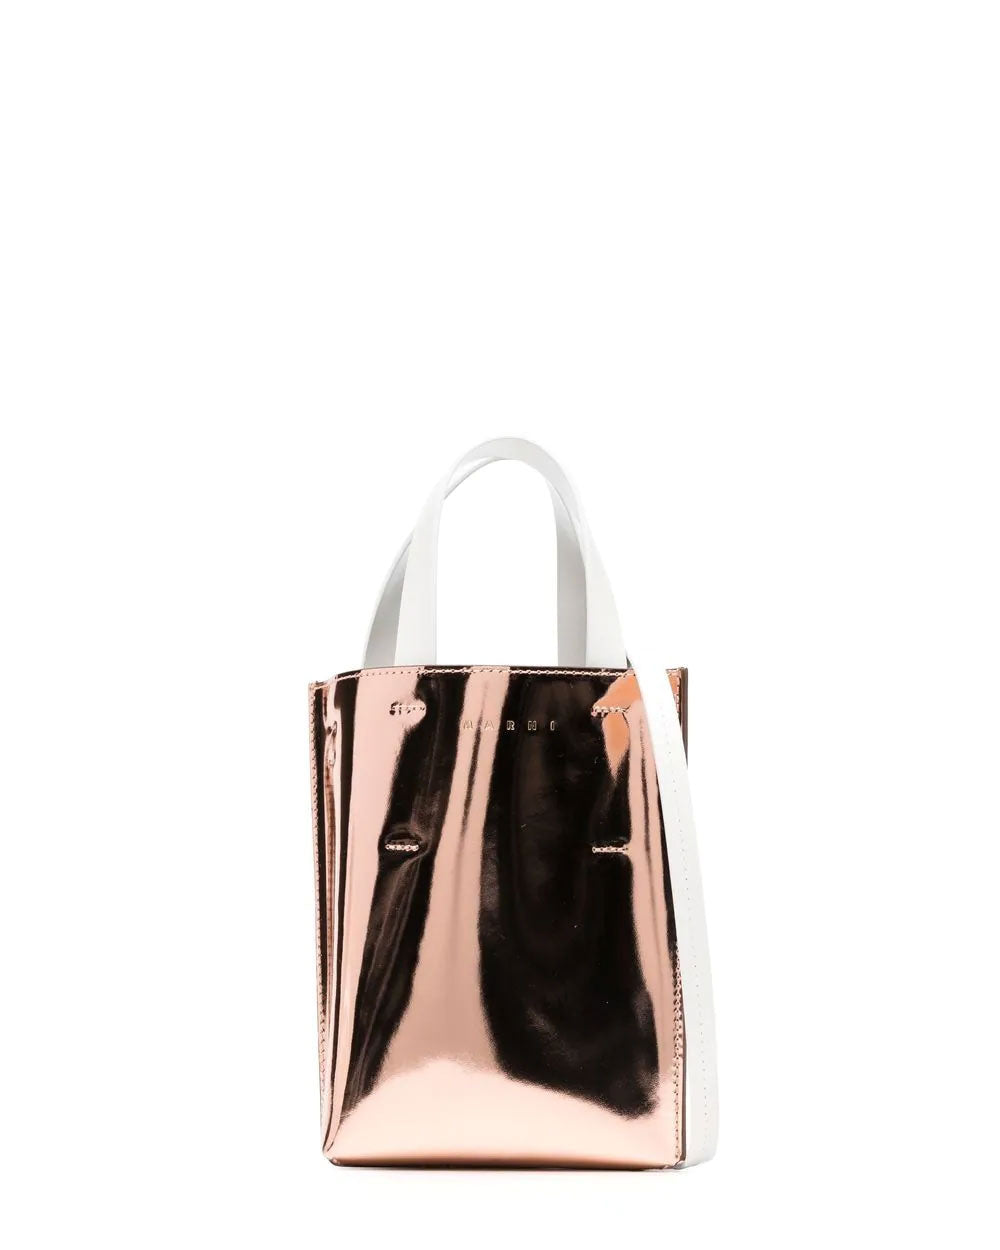 Museo Nano Bag in Rose Gold Mirrored Leather